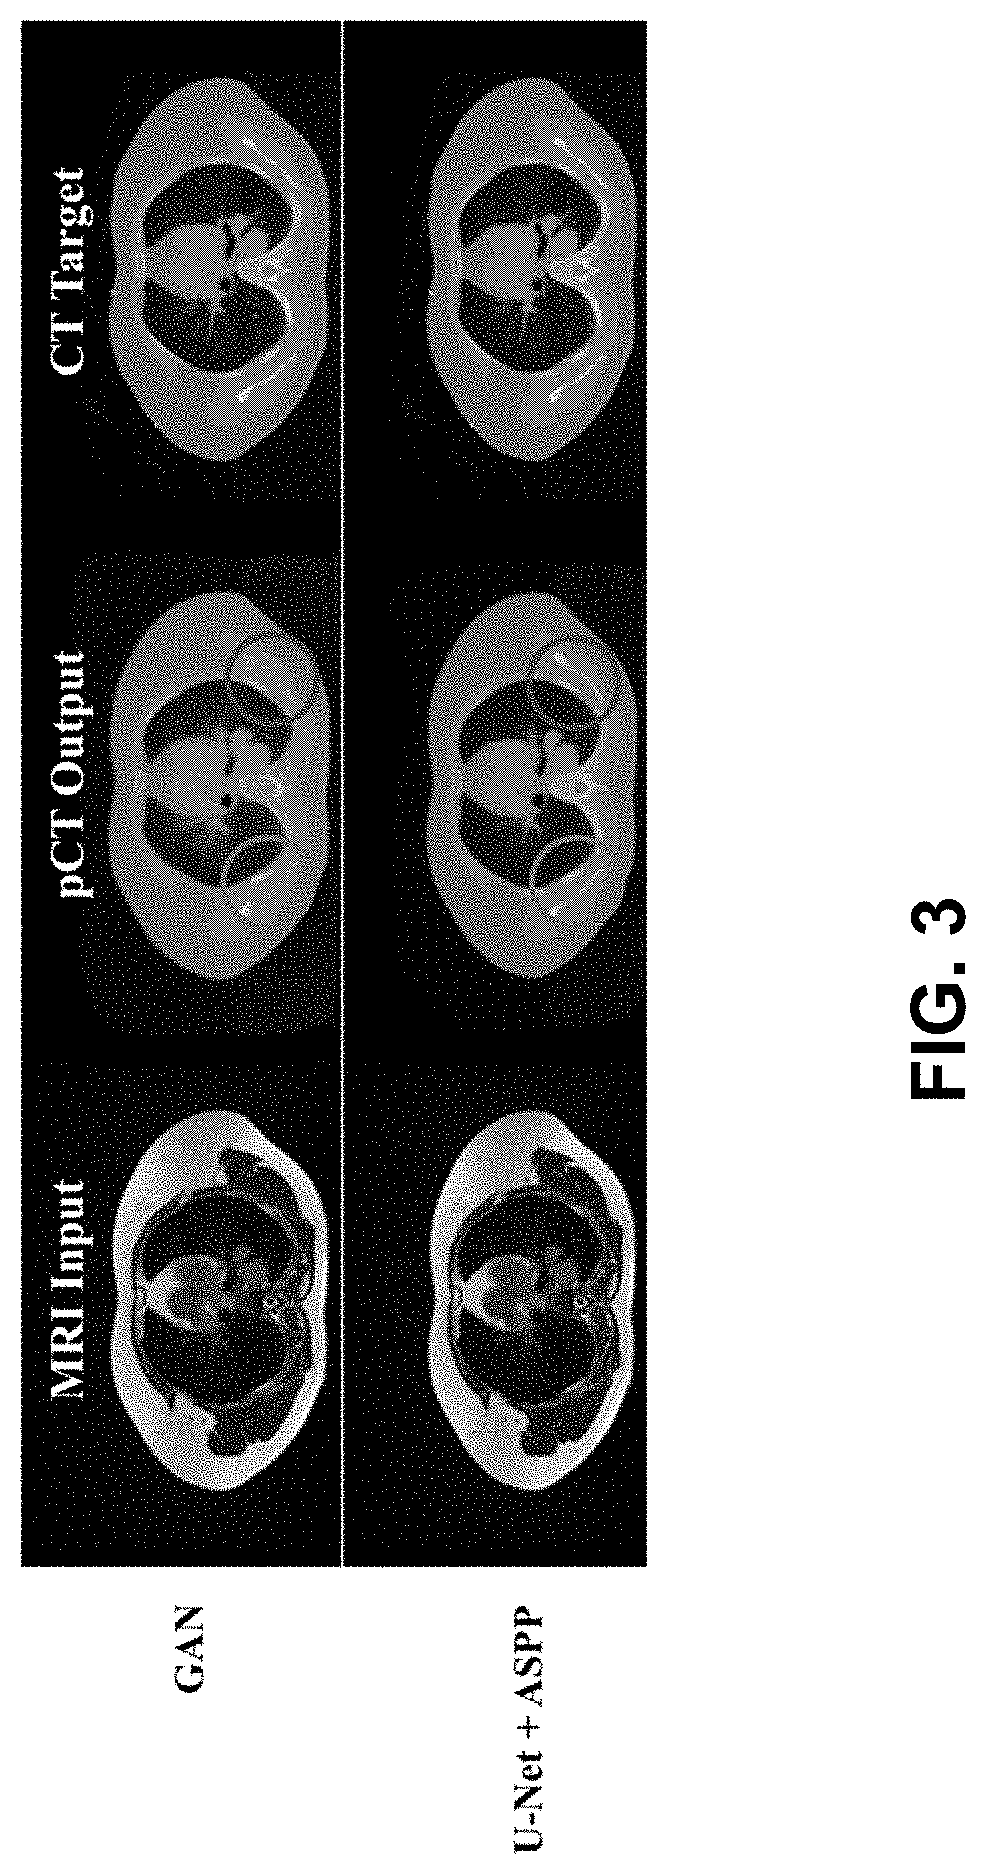 Ml-based methods for pseudo-ct and hr mr image estimation